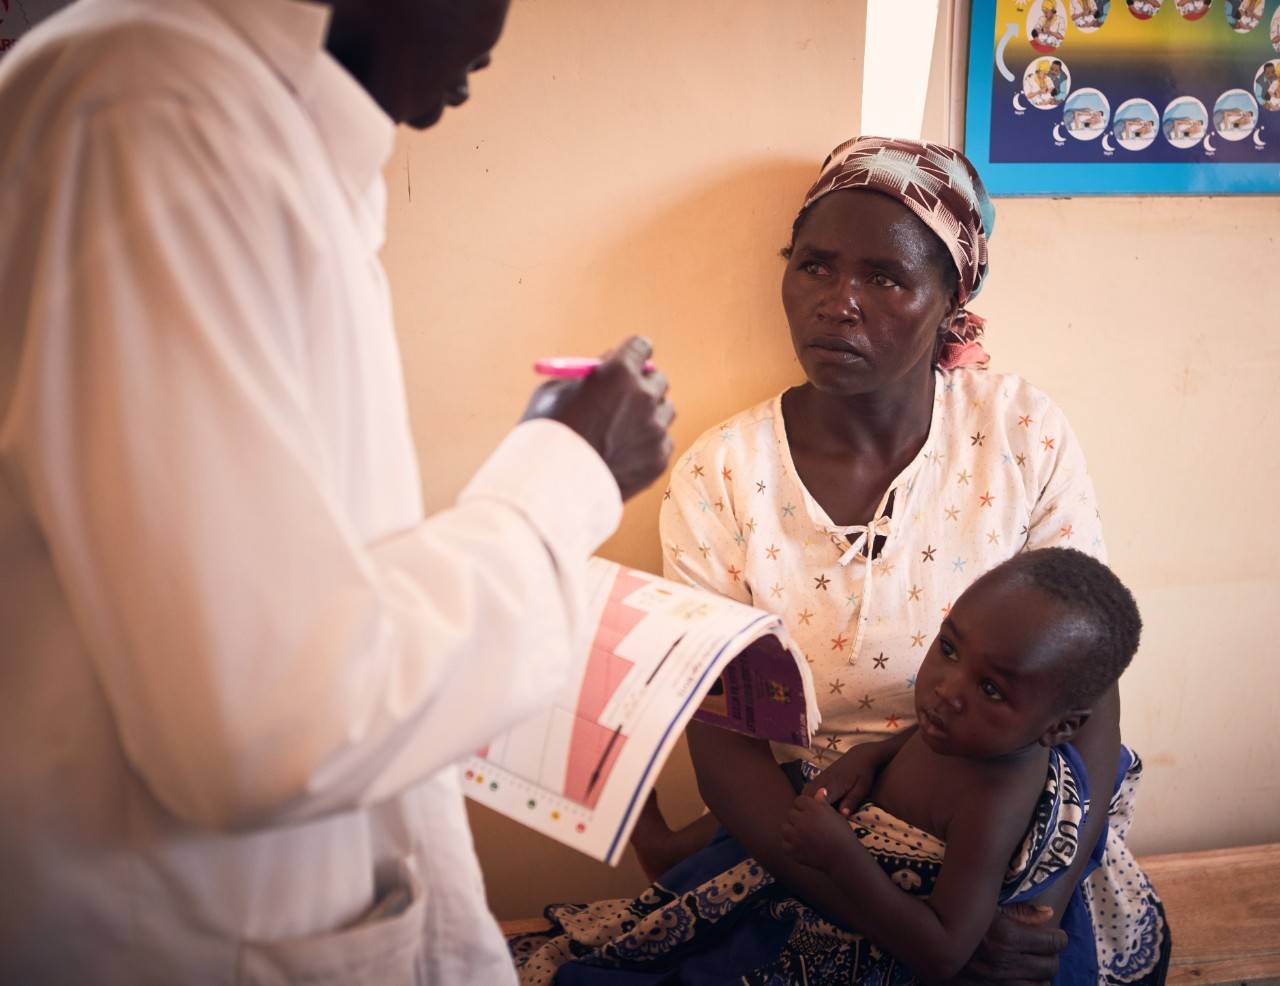 September 18, 2018. Tharaka Nithi, Kenya. Magrate Kagendo Mugambi and her 11-month-old son, Bahati, review vaccination records with a healthcare worker in rural Kenya. Local Red Cross volunteers went door-to-door in Magrate’s community to identify children missing routine immunizations, update vaccination records at local health centers, encourage parents and caregivers to have their children vaccinated, and follow up with families to confirm receipt of the recommended vaccinations. Each year in Kenya, more than 350,000 children miss their scheduled routine vaccinations—leaving them vulnerable to vaccine-preventable diseases such as measles and rubella. The American Red Cross and the Kenya Red Cross have been working together to strengthen community-level routine immunization systems in both rural and urban counties.   Measles is one of the most contagious and severe childhood diseases. Every day, it takes the lives of hundreds of children around the world. Even if a child survives, measles can cause permanent disabilities, such as blindness or brain damage. But there is hope. Since 2001, the American Red Cross and our partners in the Measles & Rubella Initiative have vaccinated more than 2 billion children around the globe. The Red Cross plays a pivotal role in vaccination campaigns worldwide: local volunteers use mass media, rallies, door-to-door visits and educational entertainment to reach families who do not have access to routine health services. Whether in distant villages or urban settlements, these campaigns may be the only way for children to receive this lifesaving vaccine. It costs about $2 to vaccinate a child against measles and rubella, making it one of the most cost-effective health interventions available. Photo by Juozas Cernius / American Red Cross